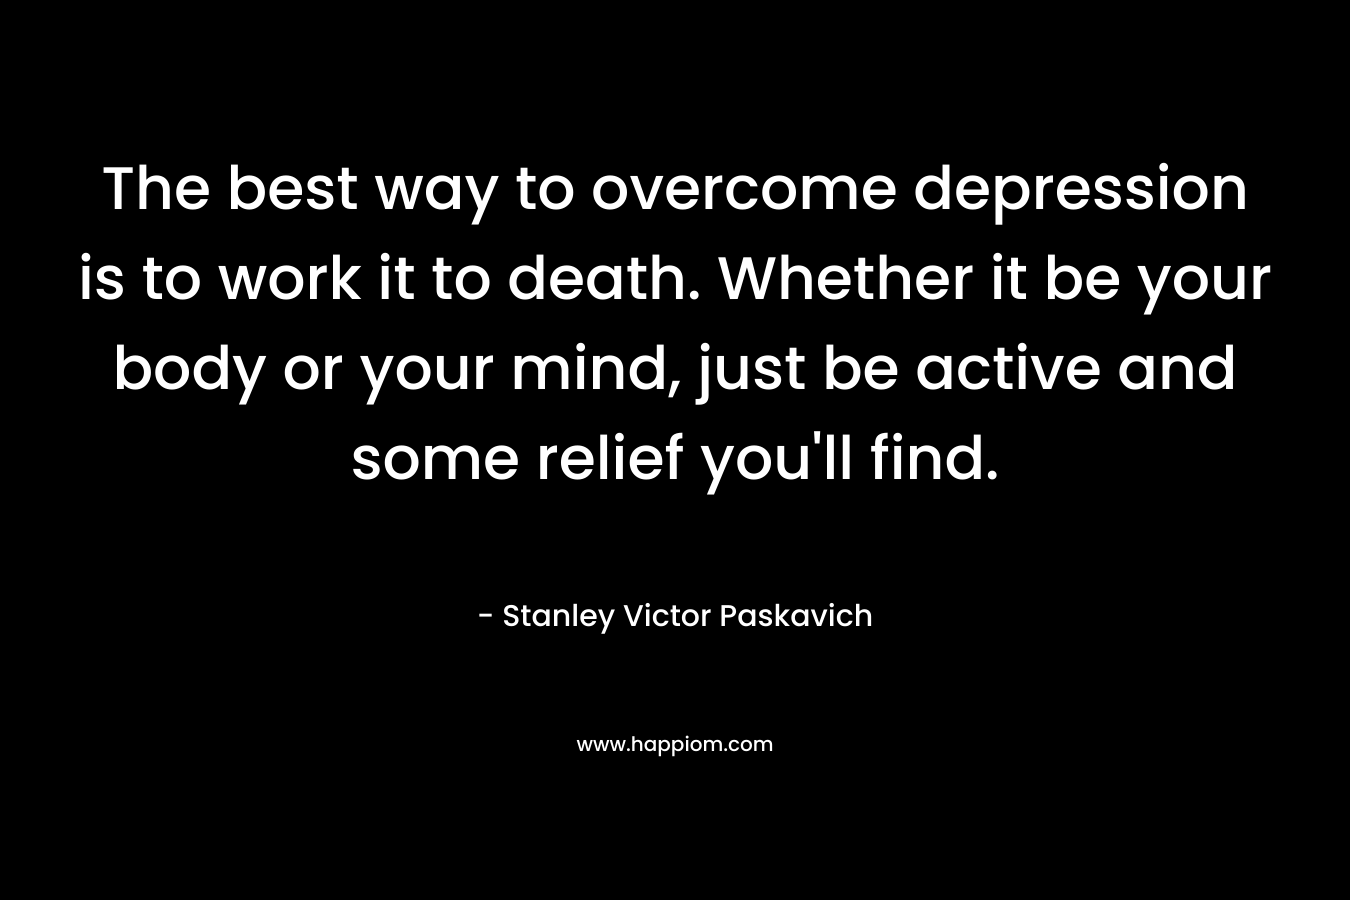 The best way to overcome depression is to work it to death. Whether it be your body or your mind, just be active and some relief you'll find.